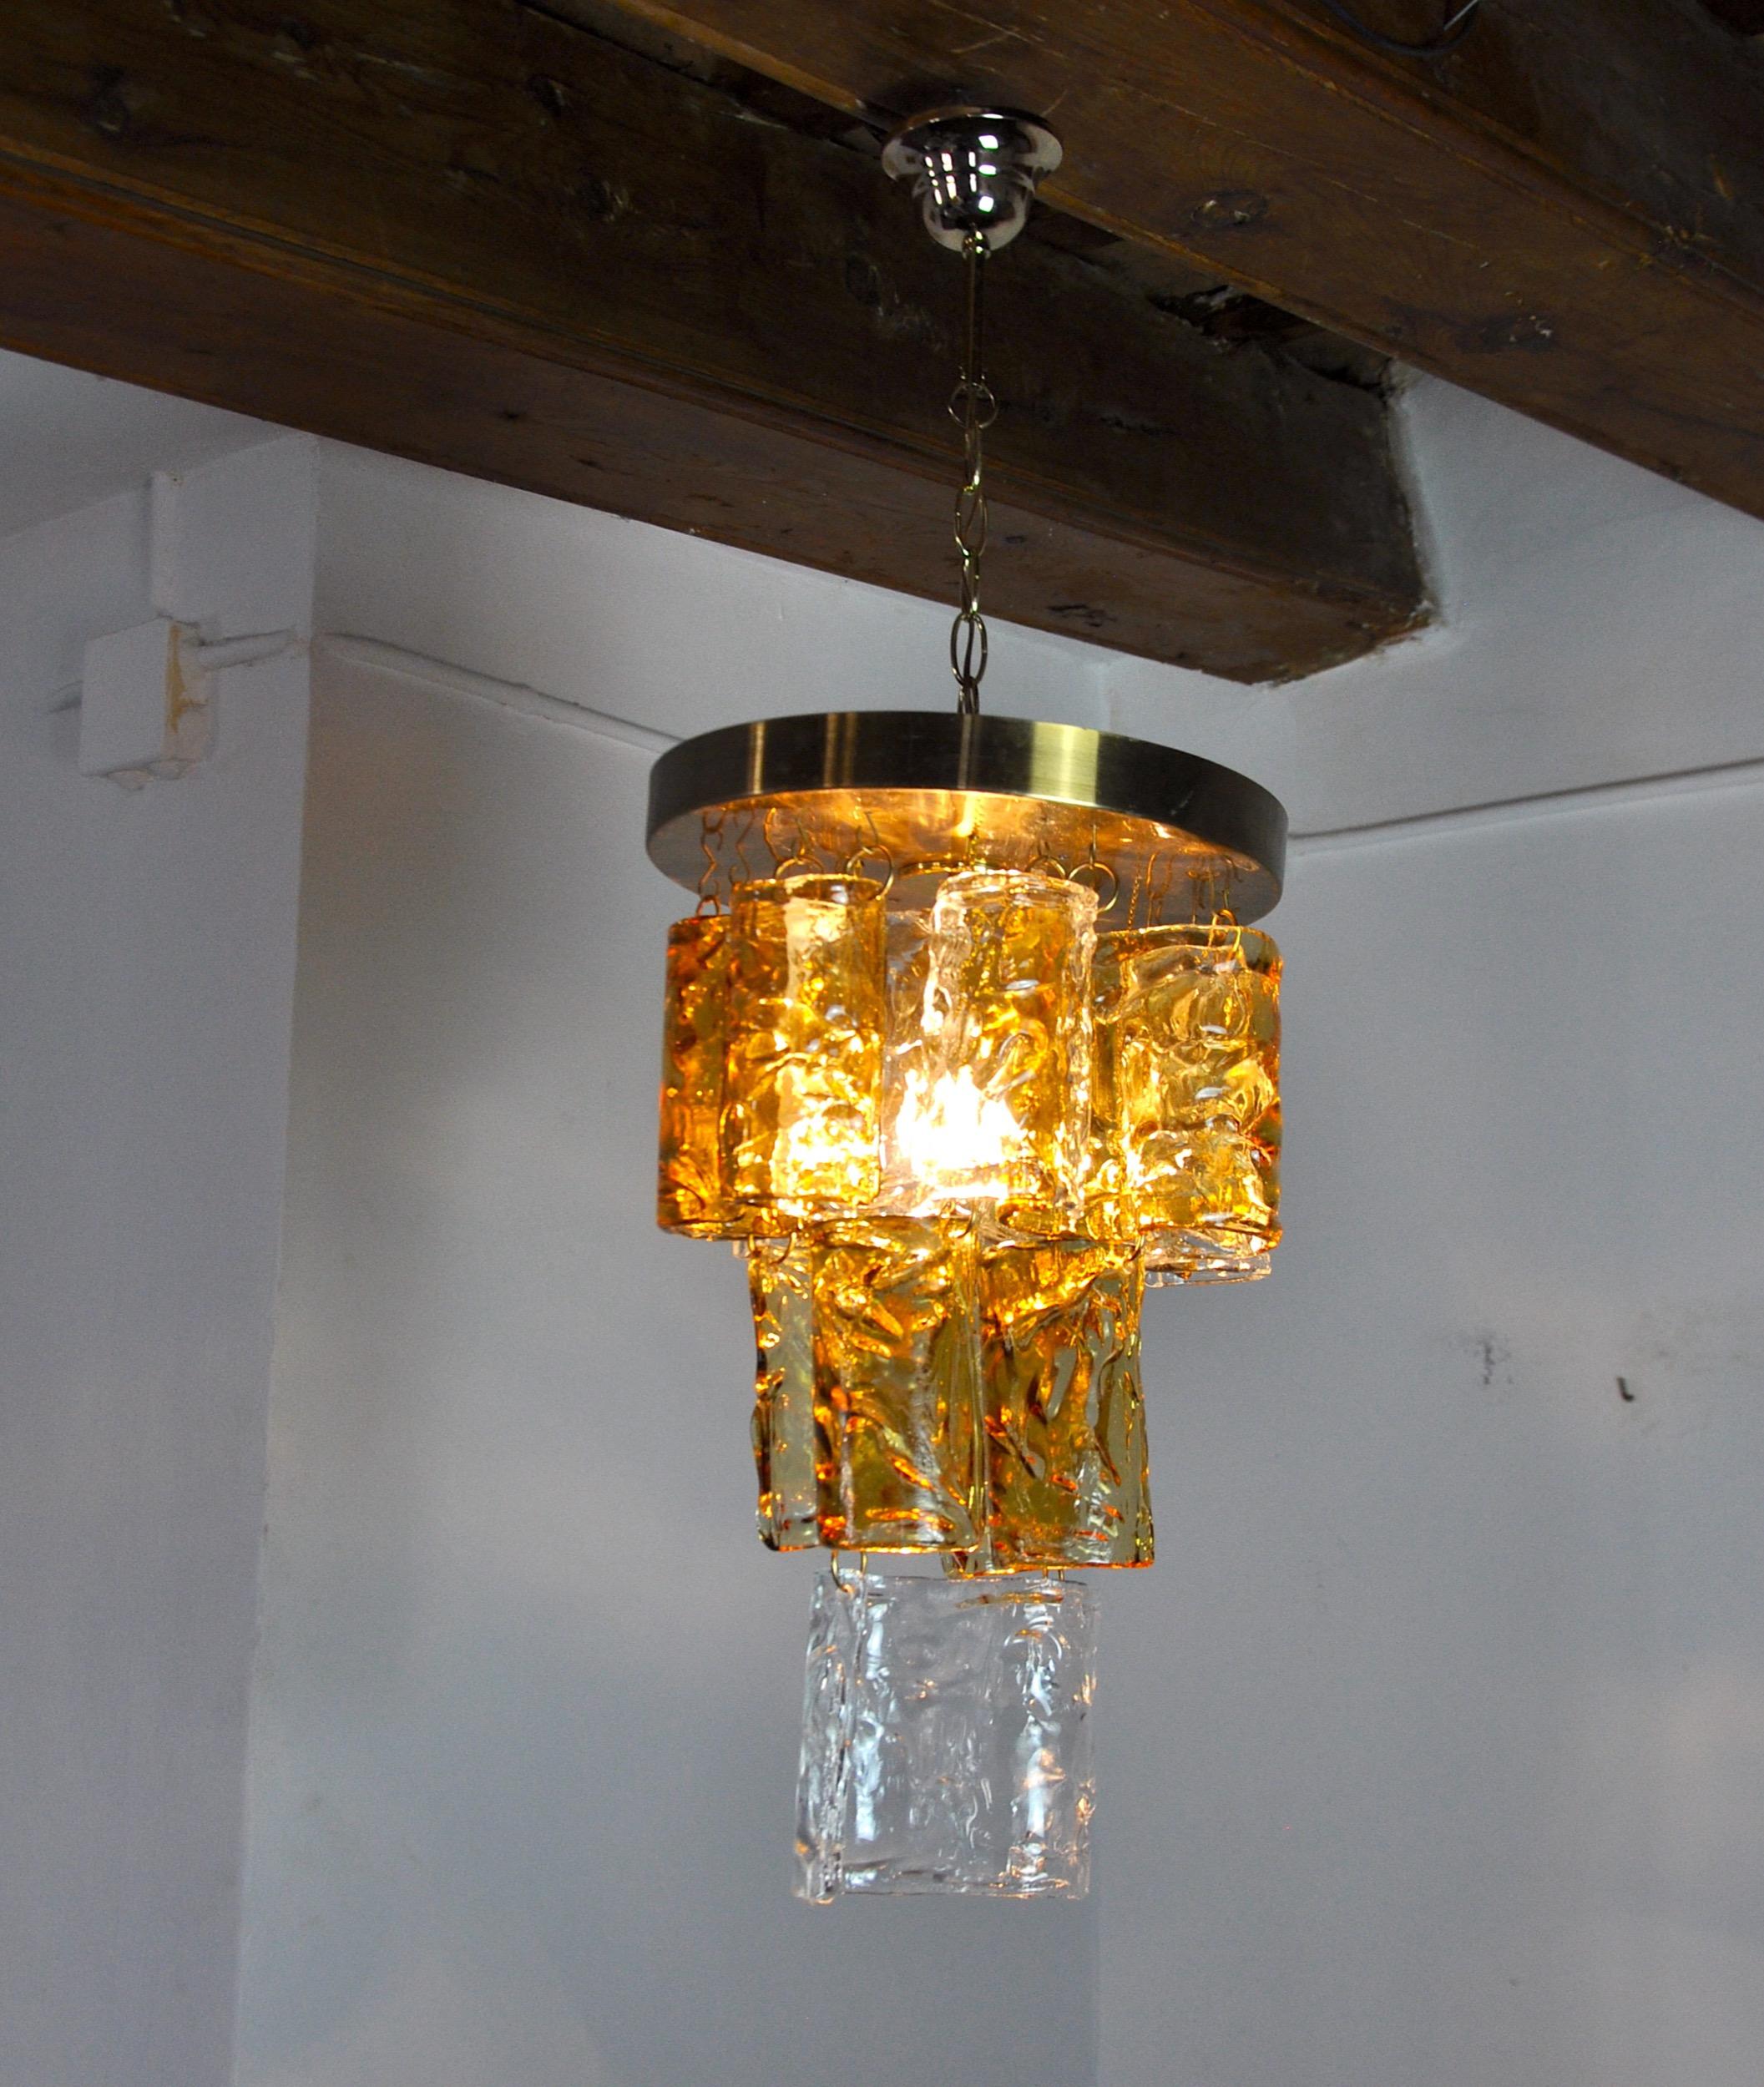 Superb and rare waterfall chandelier designed and produced by zero quattro in the 70s in murano, italy. Golden structure and orange curved crystals spread over 3 levels in perfect condition. Rare design object that will illuminate your interior